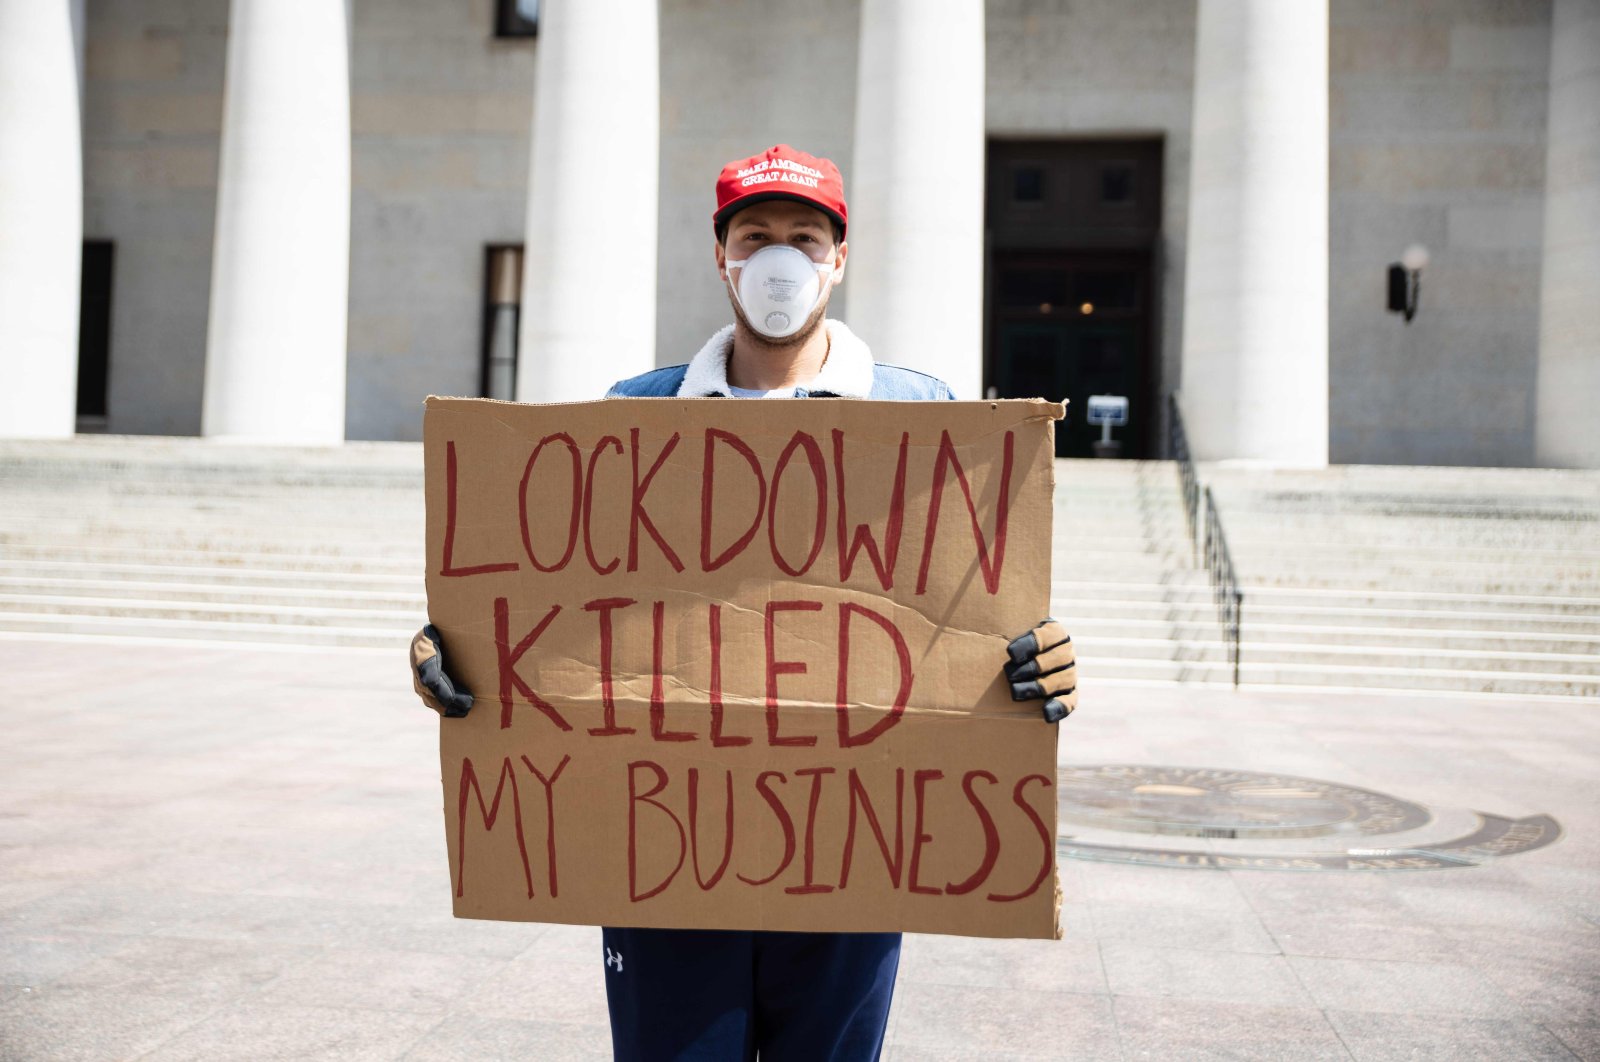 A protester holds a sign outside the Ohio Statehouse in Columbus, Ohio on April 18, 2020, to protest the stay-home order in effect until May 1. (AFP Photo)